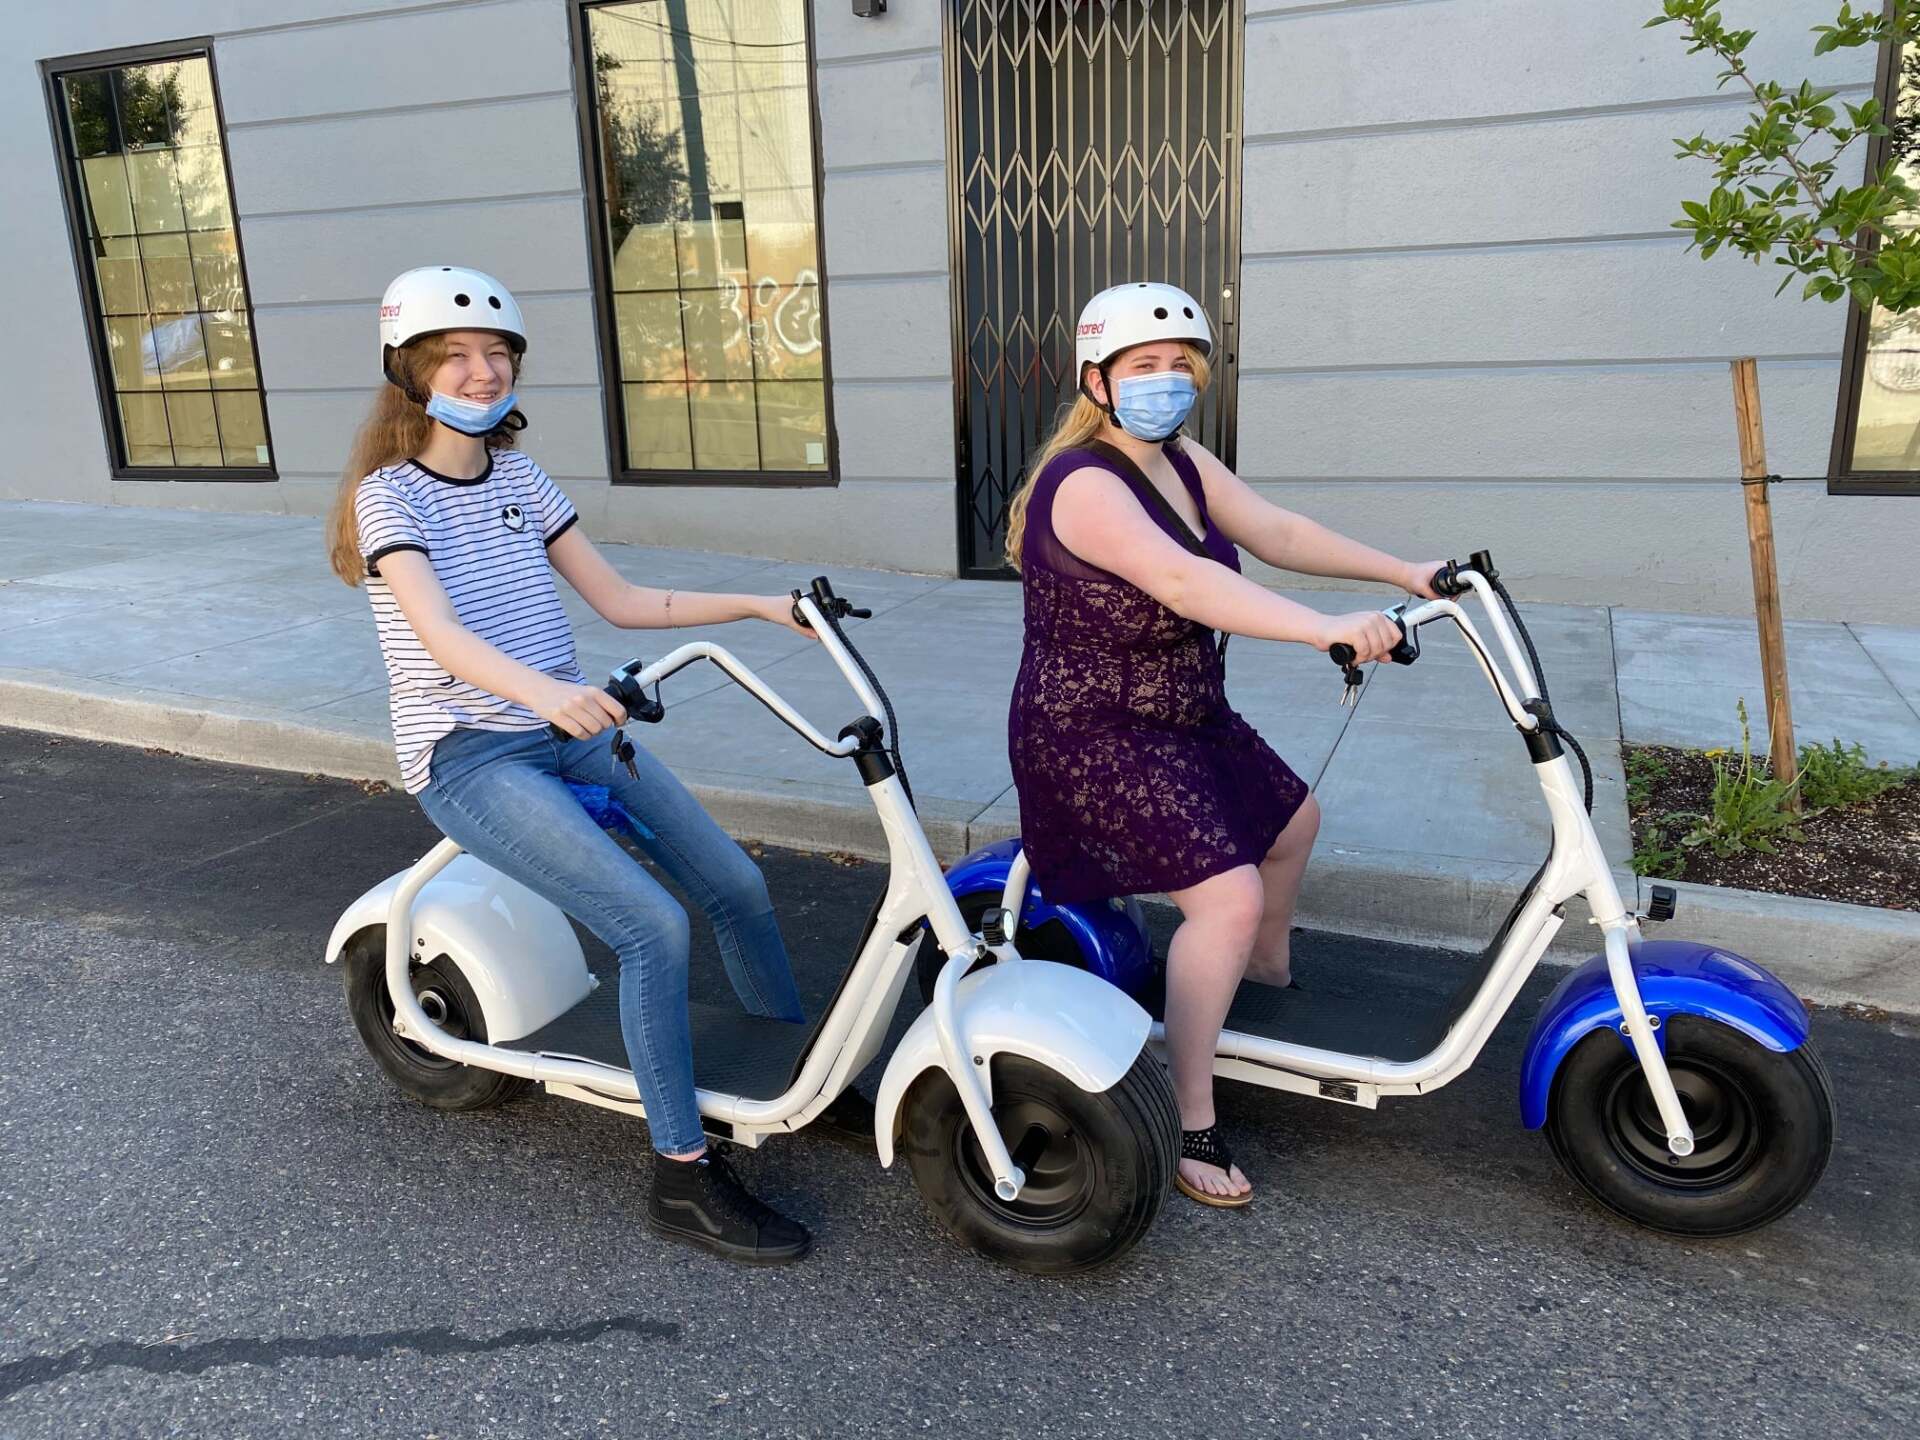 two women wearing masks are riding scooters on the street